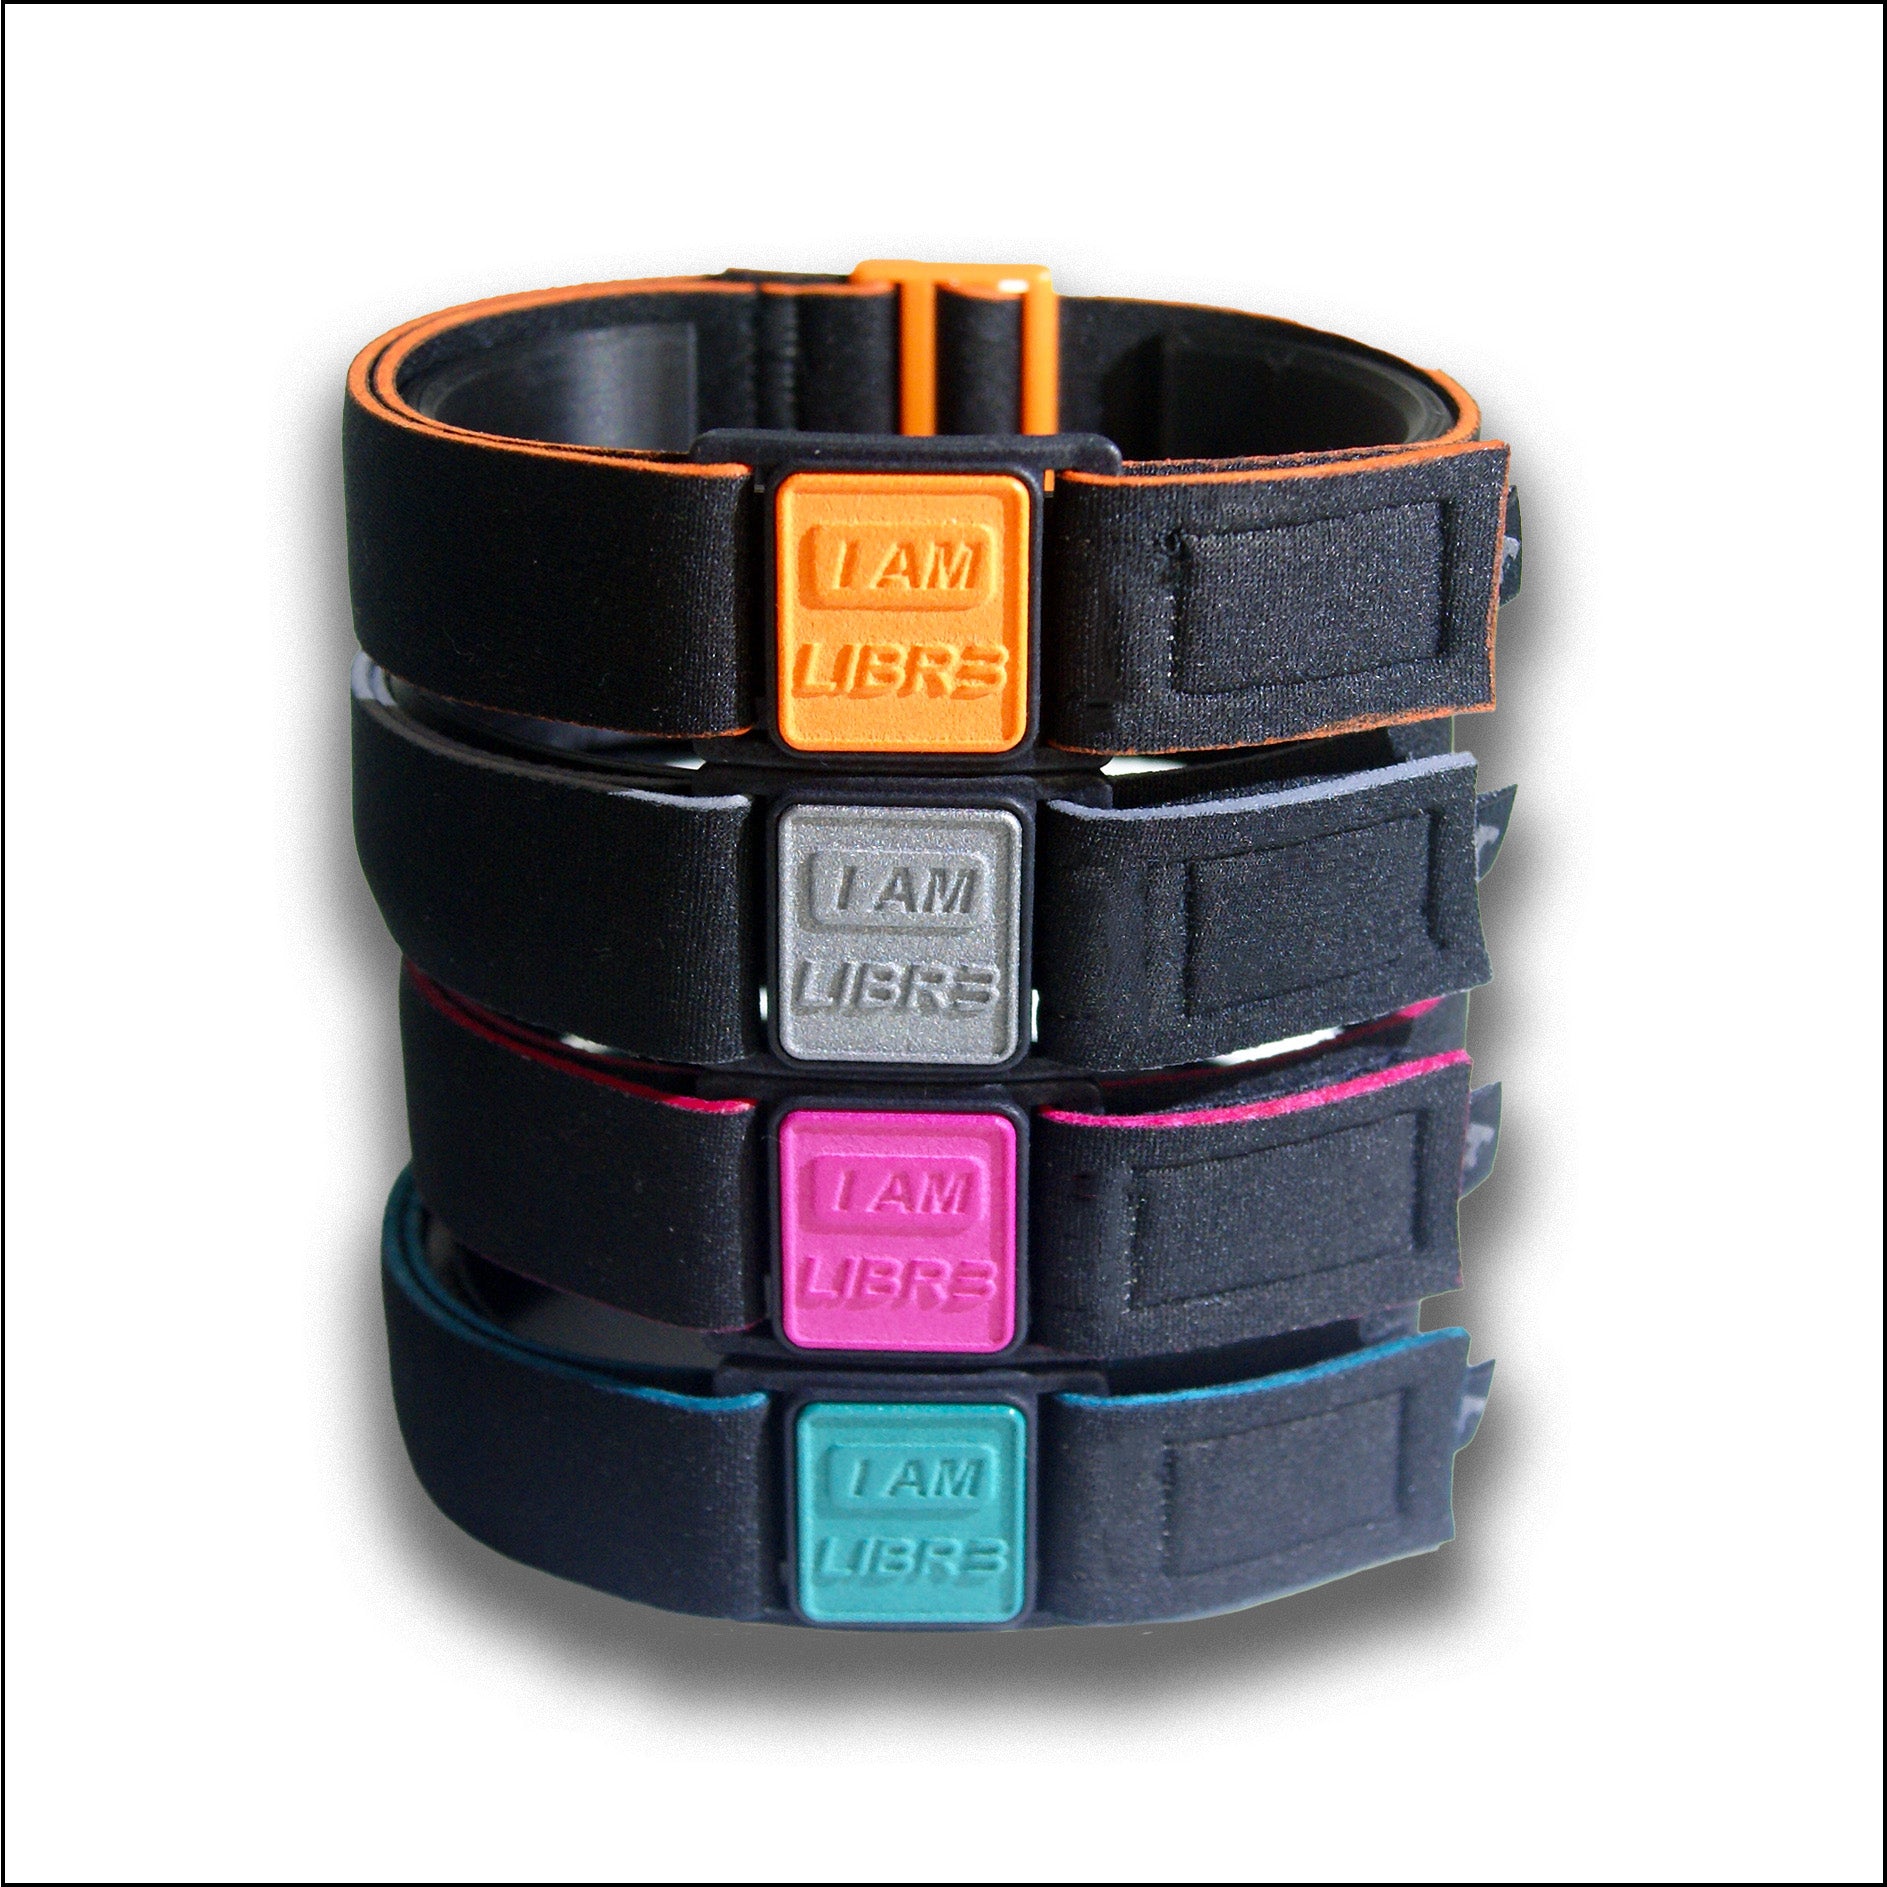 Stack of I AM LIBR3 armbands for FreeStyle Libre 3 CGM.